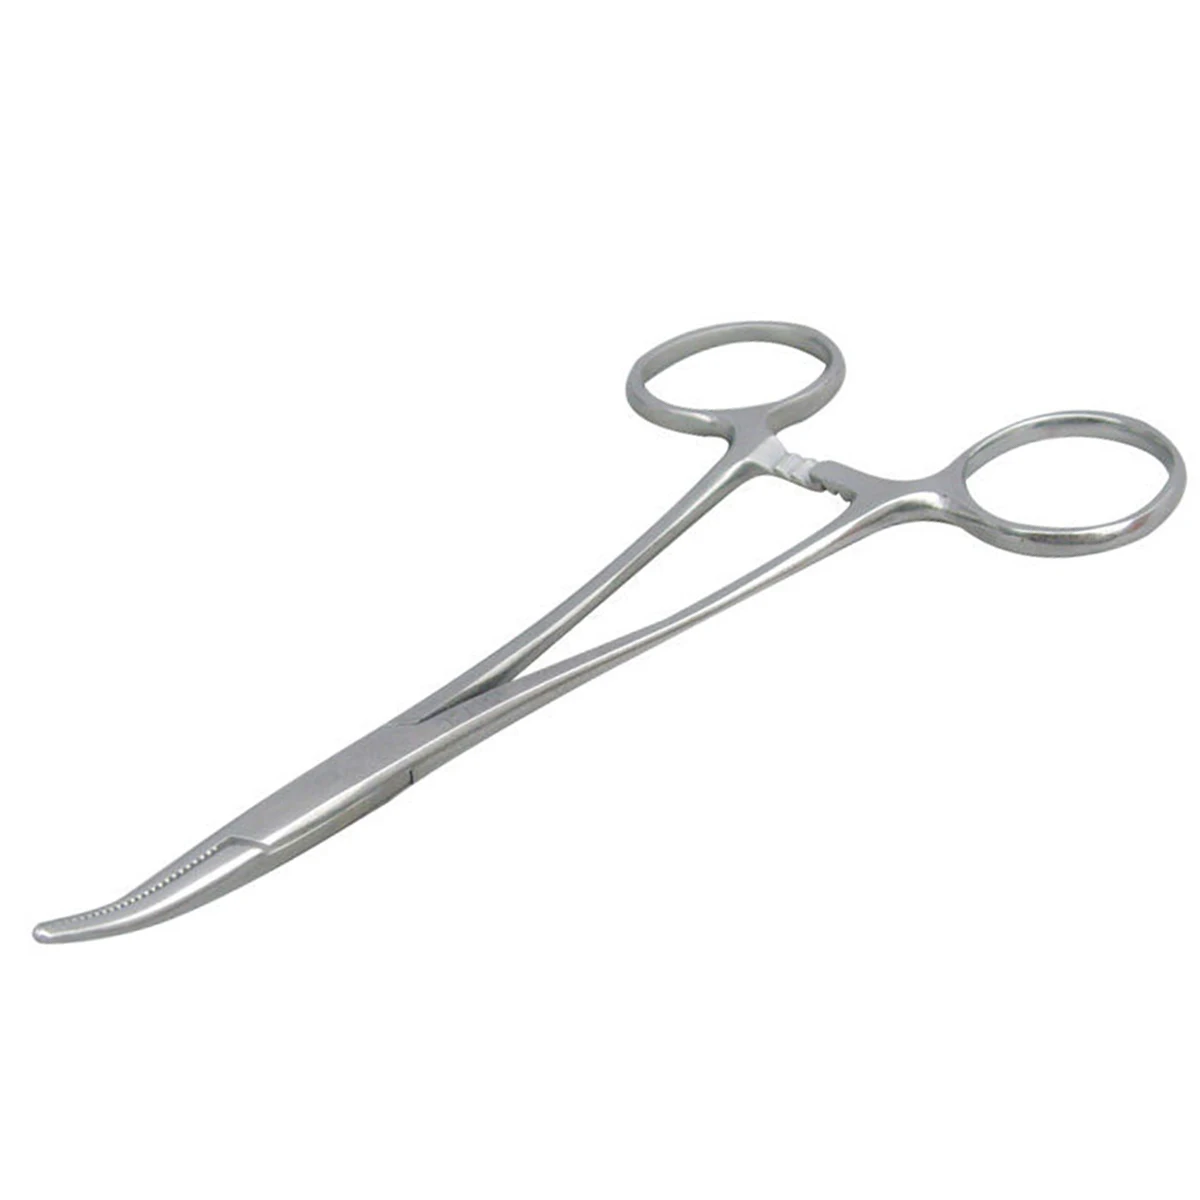 Hemostat Forceps Fishing Model craft doll making tools Straight or curved 